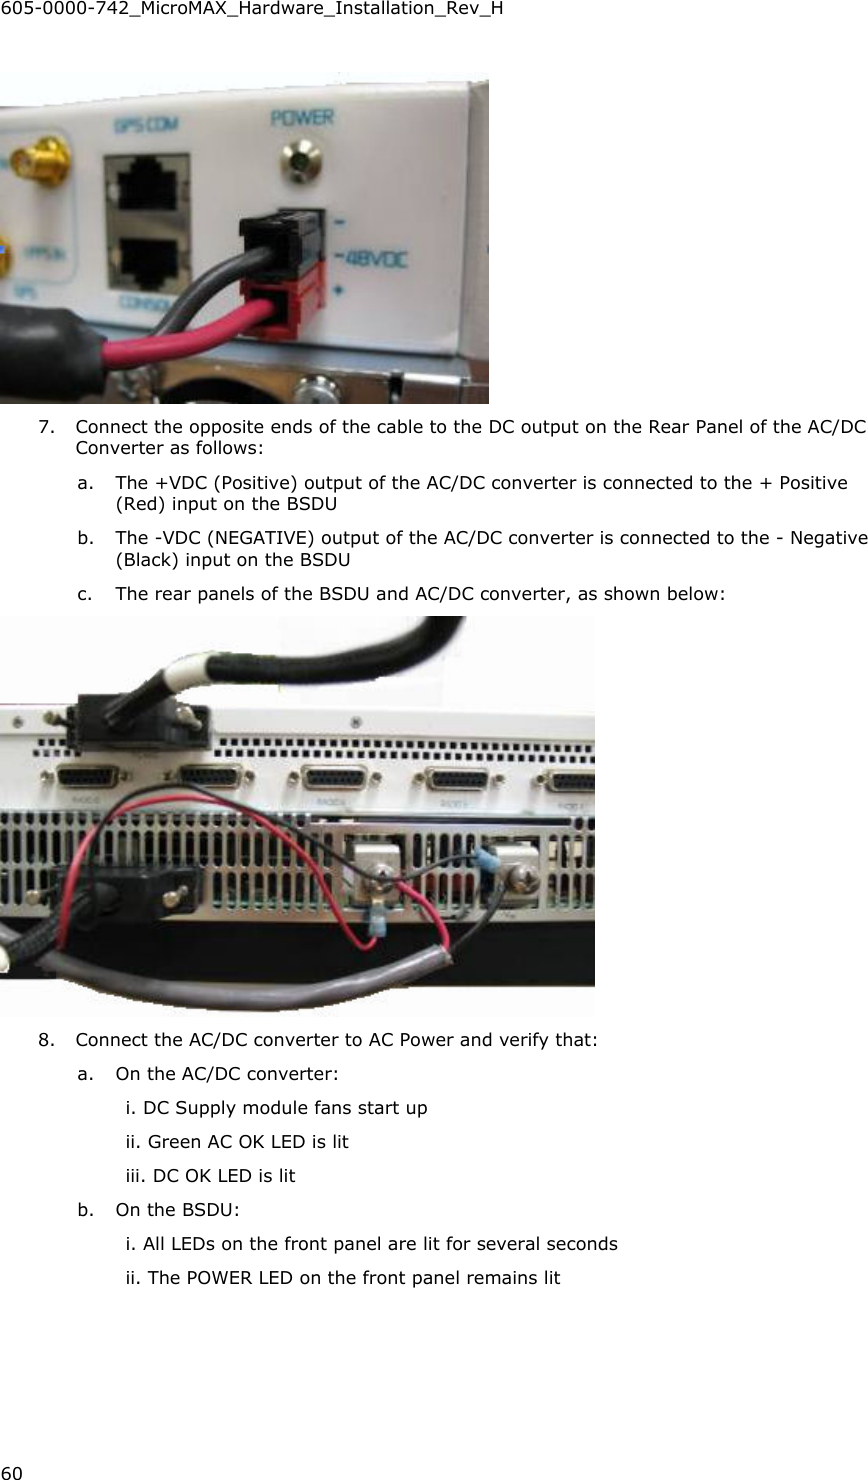 605-0000-742_MicroMAX_Hardware_Installation_Rev_H 60     7. Connect the opposite ends of the cable to the DC output on the Rear Panel of the AC/DC Converter as follows: a. The +VDC (Positive) output of the AC/DC converter is connected to the + Positive (Red) input on the BSDU b. The -VDC (NEGATIVE) output of the AC/DC converter is connected to the - Negative (Black) input on the BSDU c. The rear panels of the BSDU and AC/DC converter, as shown below:  8. Connect the AC/DC converter to AC Power and verify that: a. On the AC/DC converter: i. DC Supply module fans start up ii. Green AC OK LED is lit iii. DC OK LED is lit b. On the BSDU: i. All LEDs on the front panel are lit for several seconds ii. The POWER LED on the front panel remains lit 